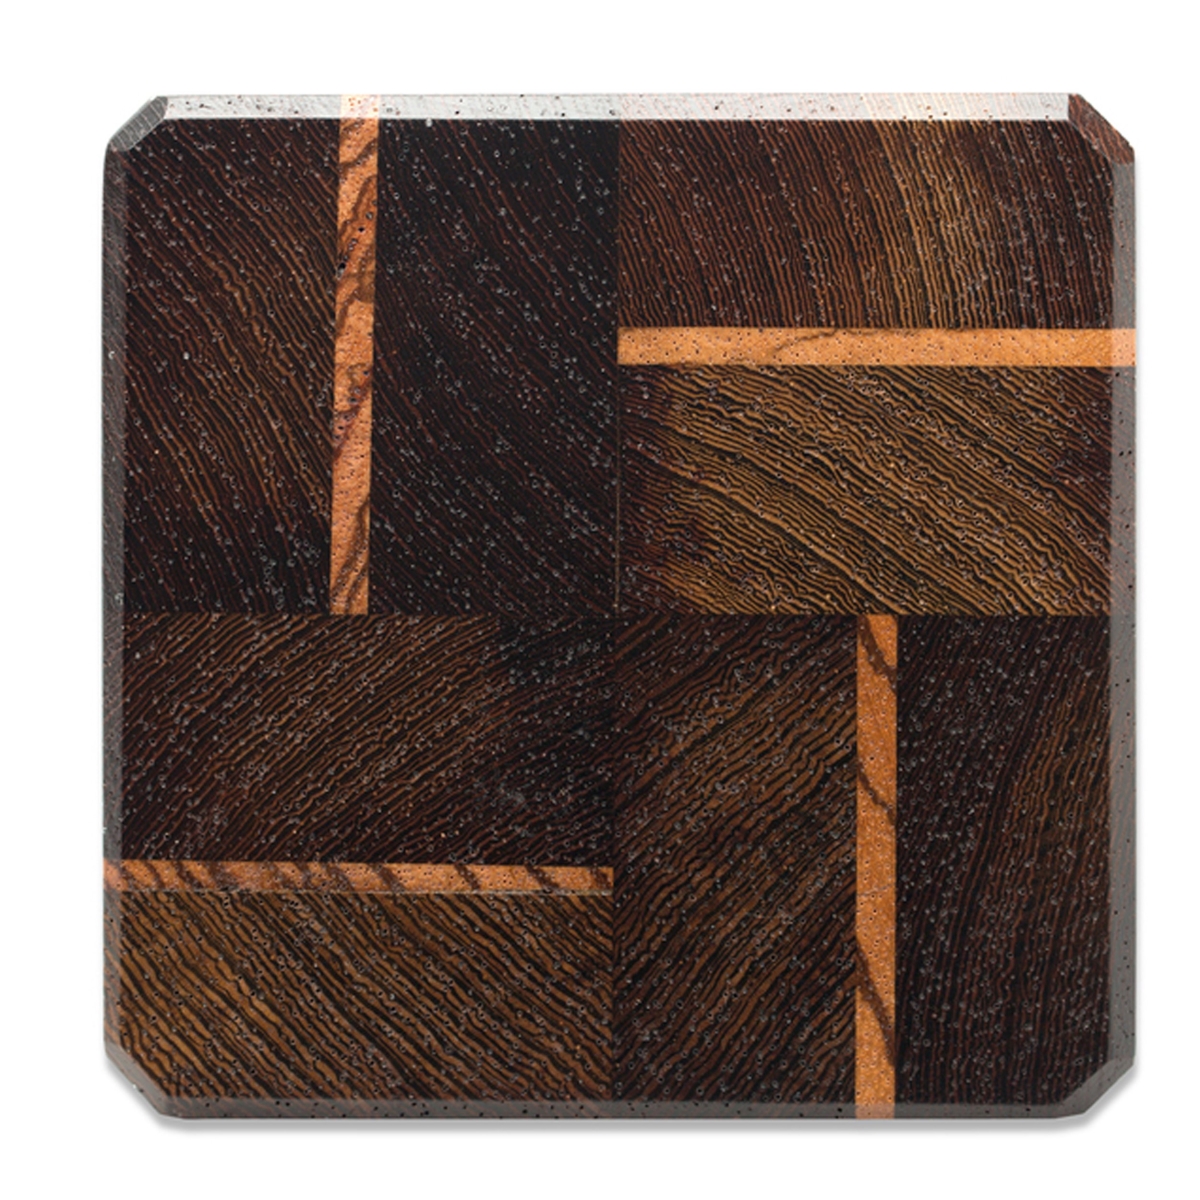 Picture of A & E Millwork AEM-5044 Single Wenge & Tiger Wood Coasters